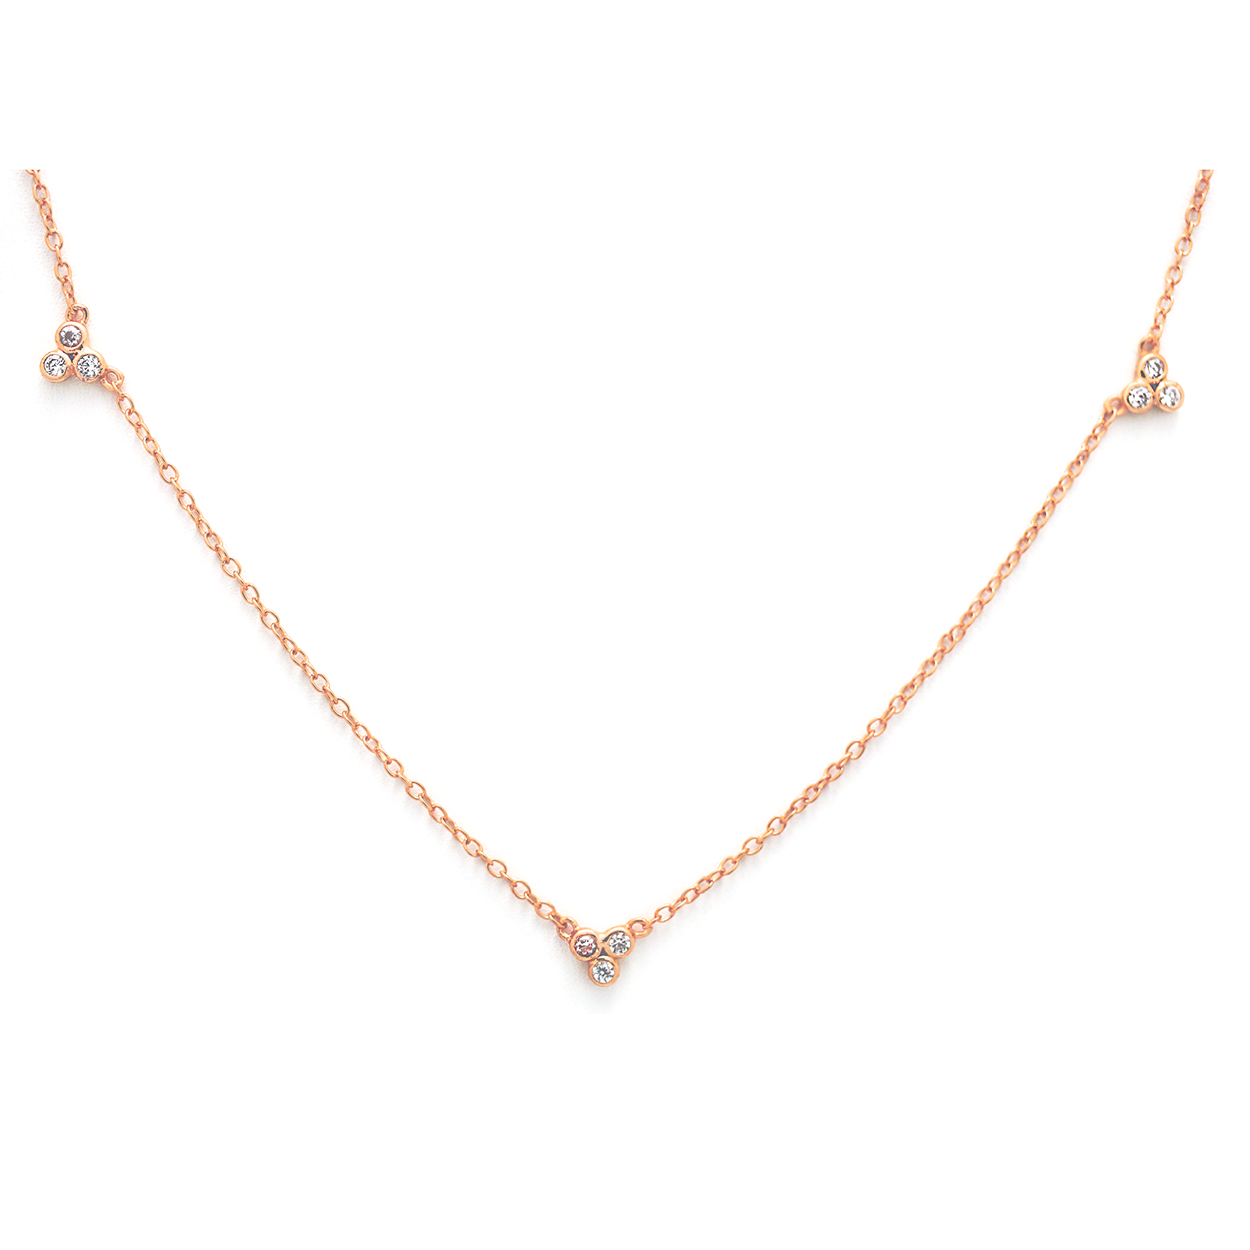 18kt Rose Gold Plated Necklace with Triple Set Cubic Zirconia Charms